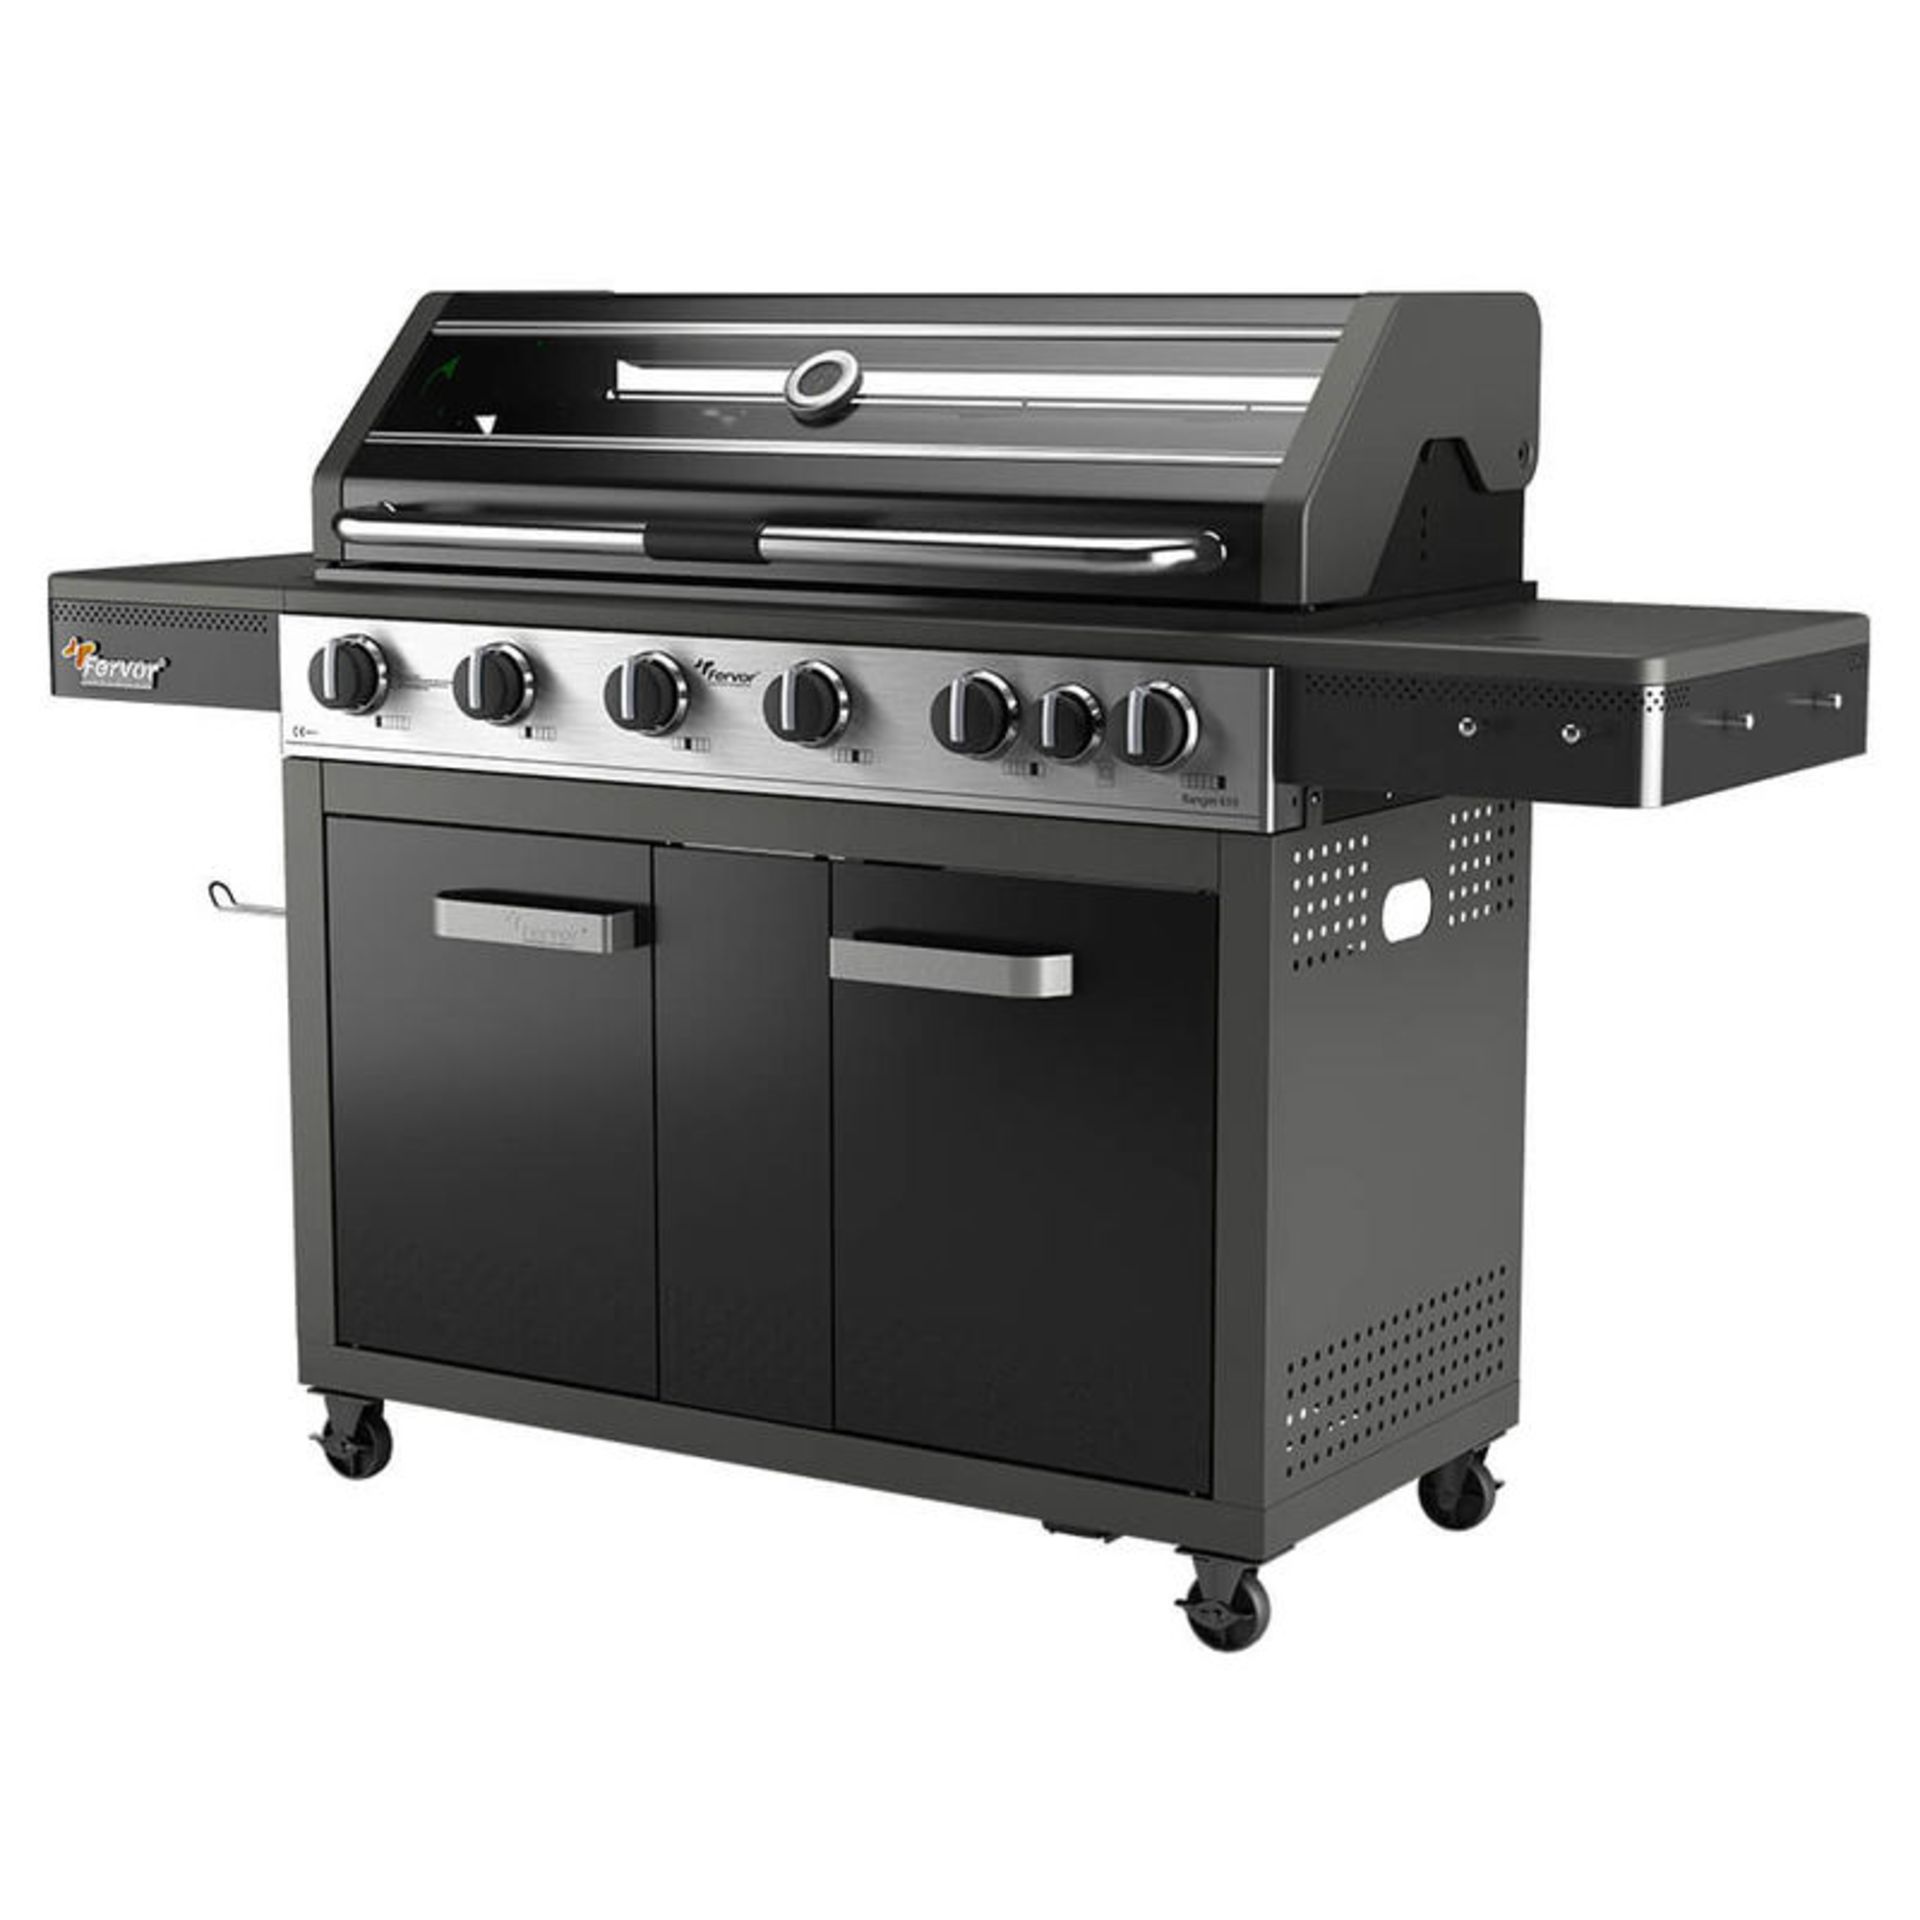 1x Fervor Ranger 610 6 Burner Gas BBQ RRP £330. New, Banded Item With Box Damage. (Contents Not Che